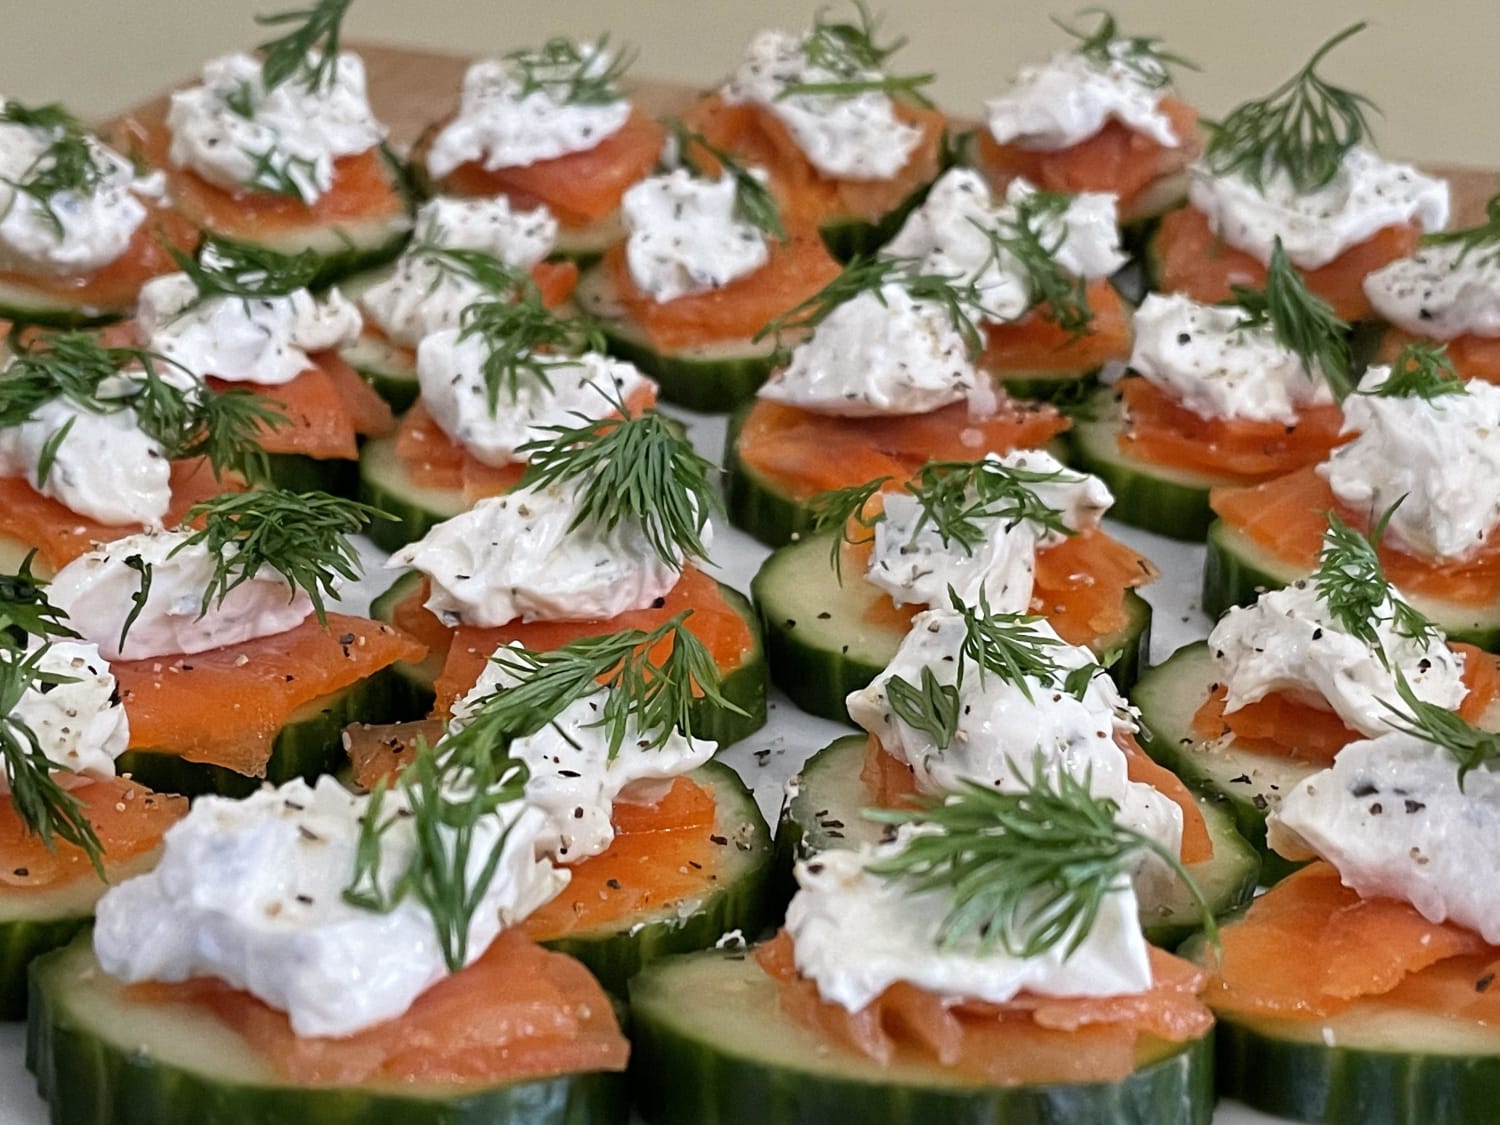 [I made] smoked salmon bites as an Easter app